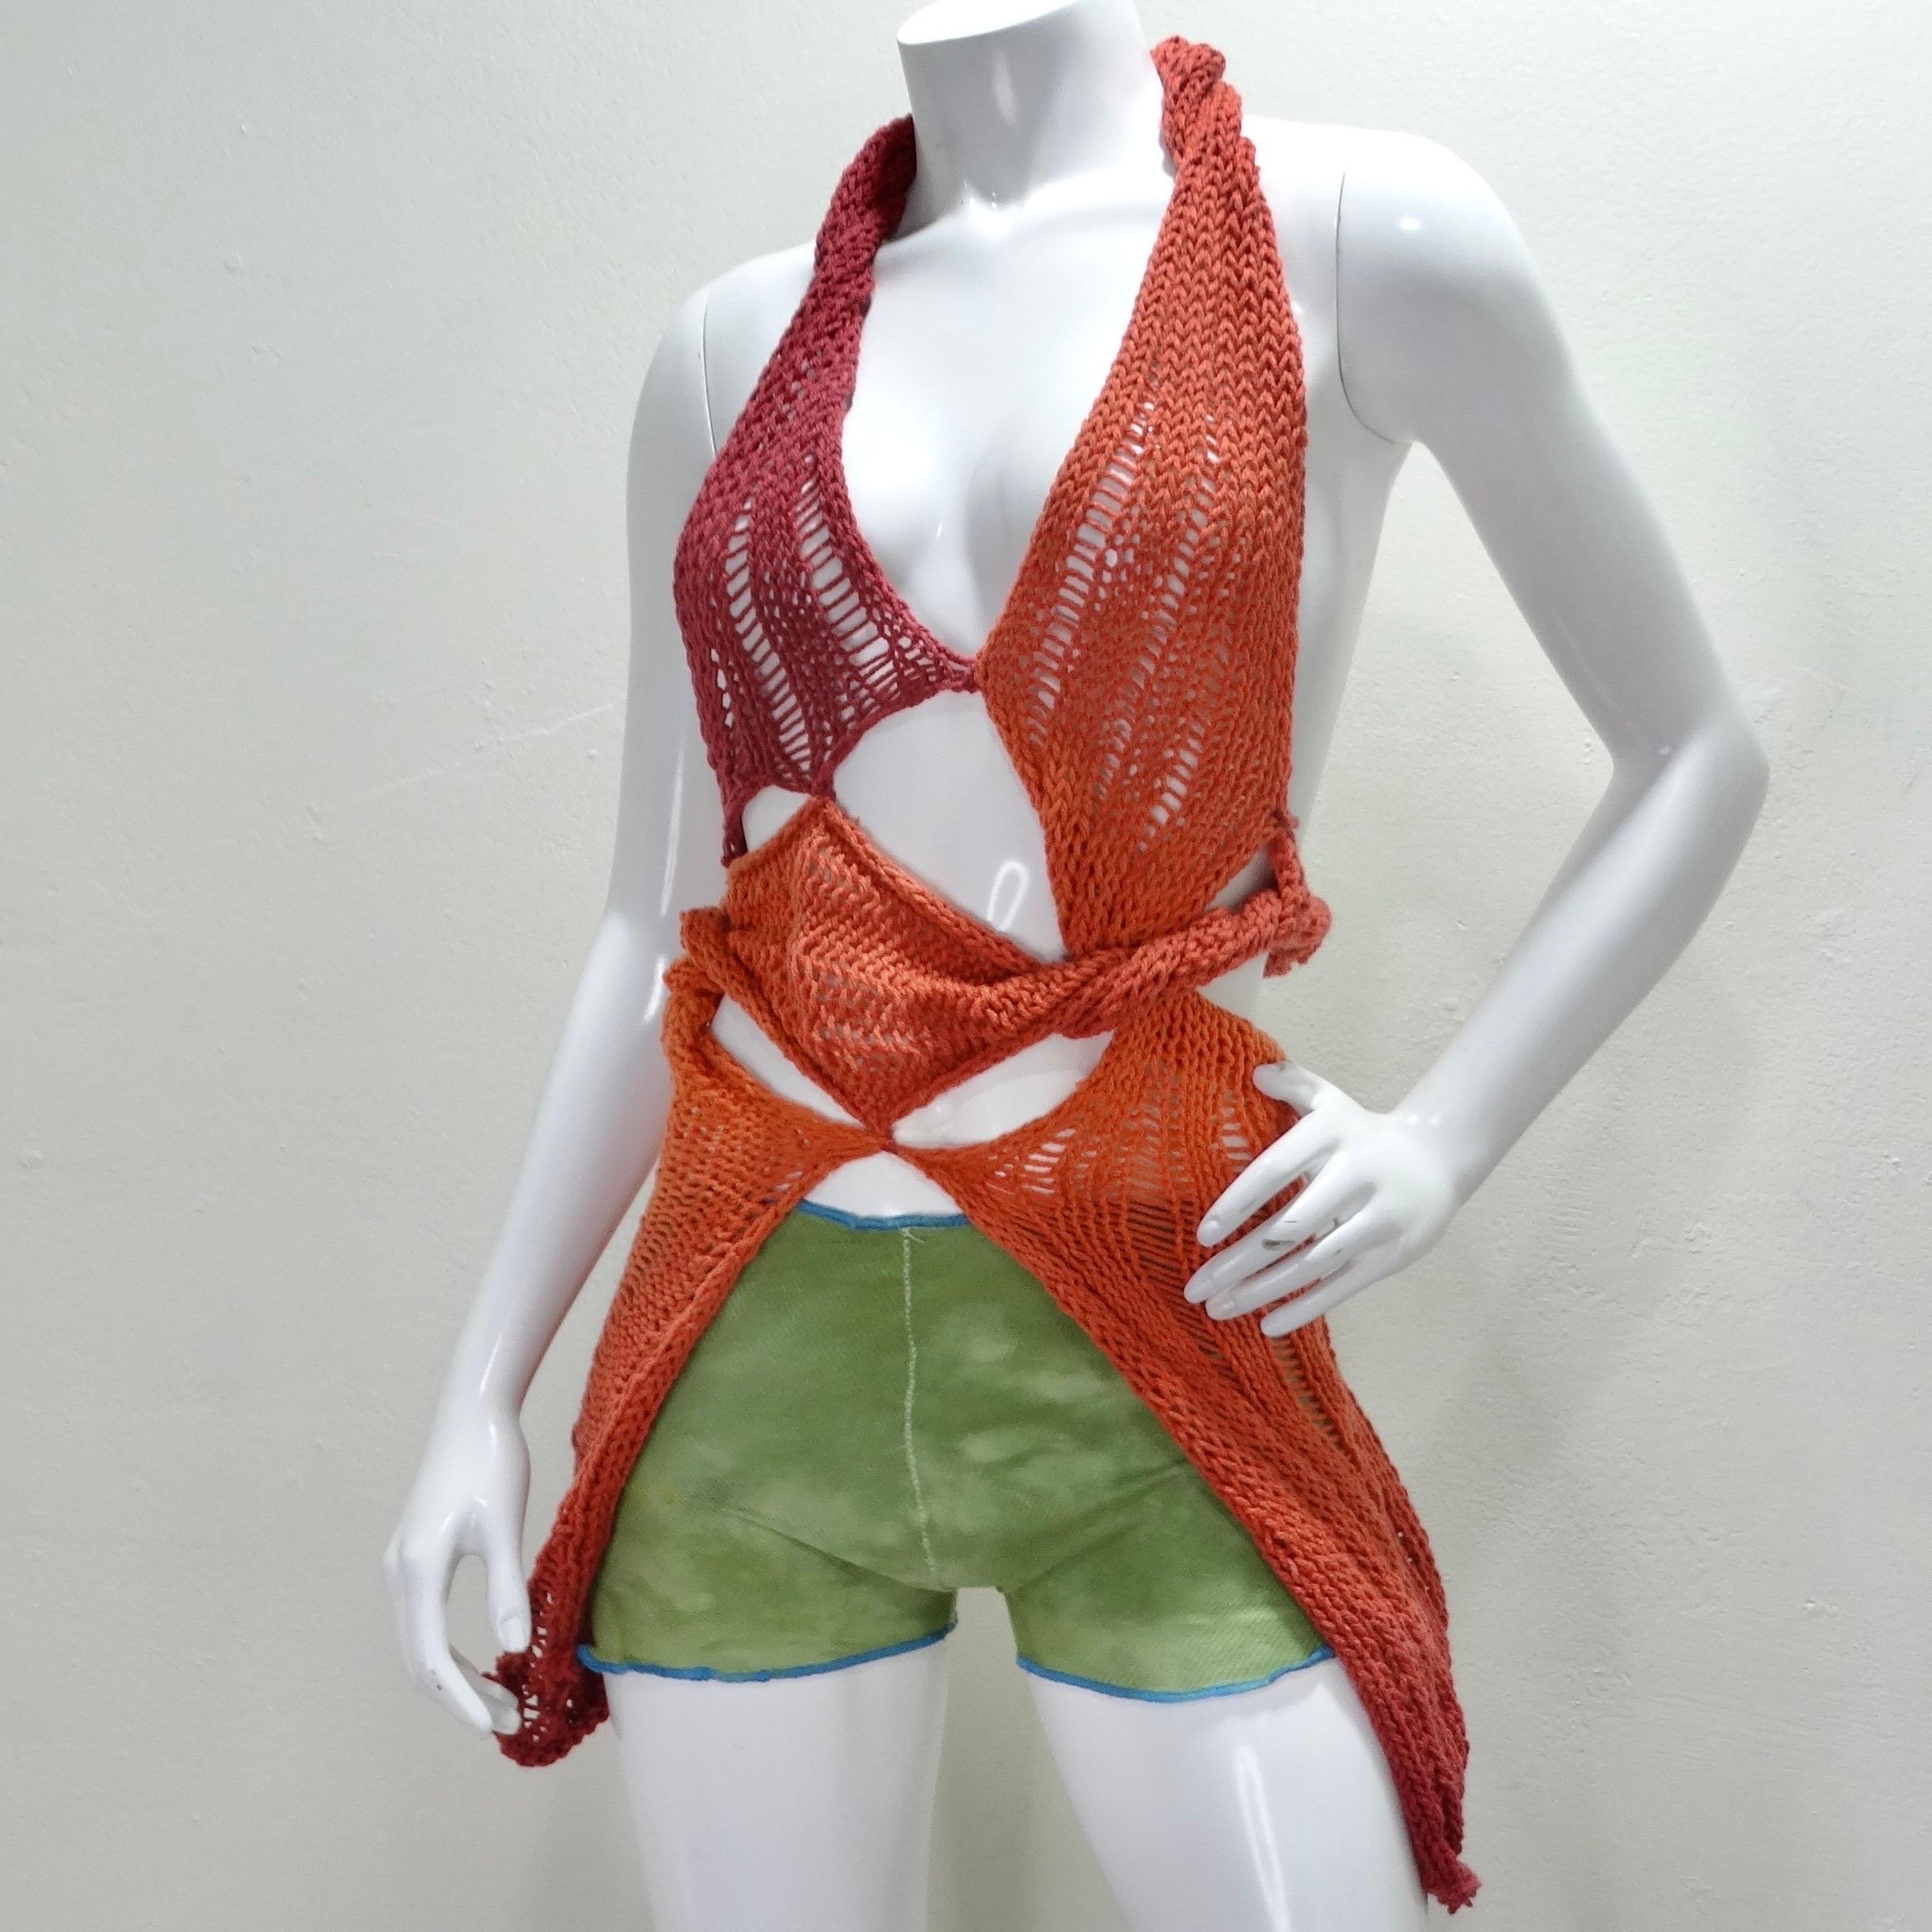 How fun is this hand knitted twist motif cover up top! The most unique summer styling piece is calling your name! Arizona based emerging designer Elliana Capri presents this whimsical hand knit halter top with a unique distressed style of stitching.